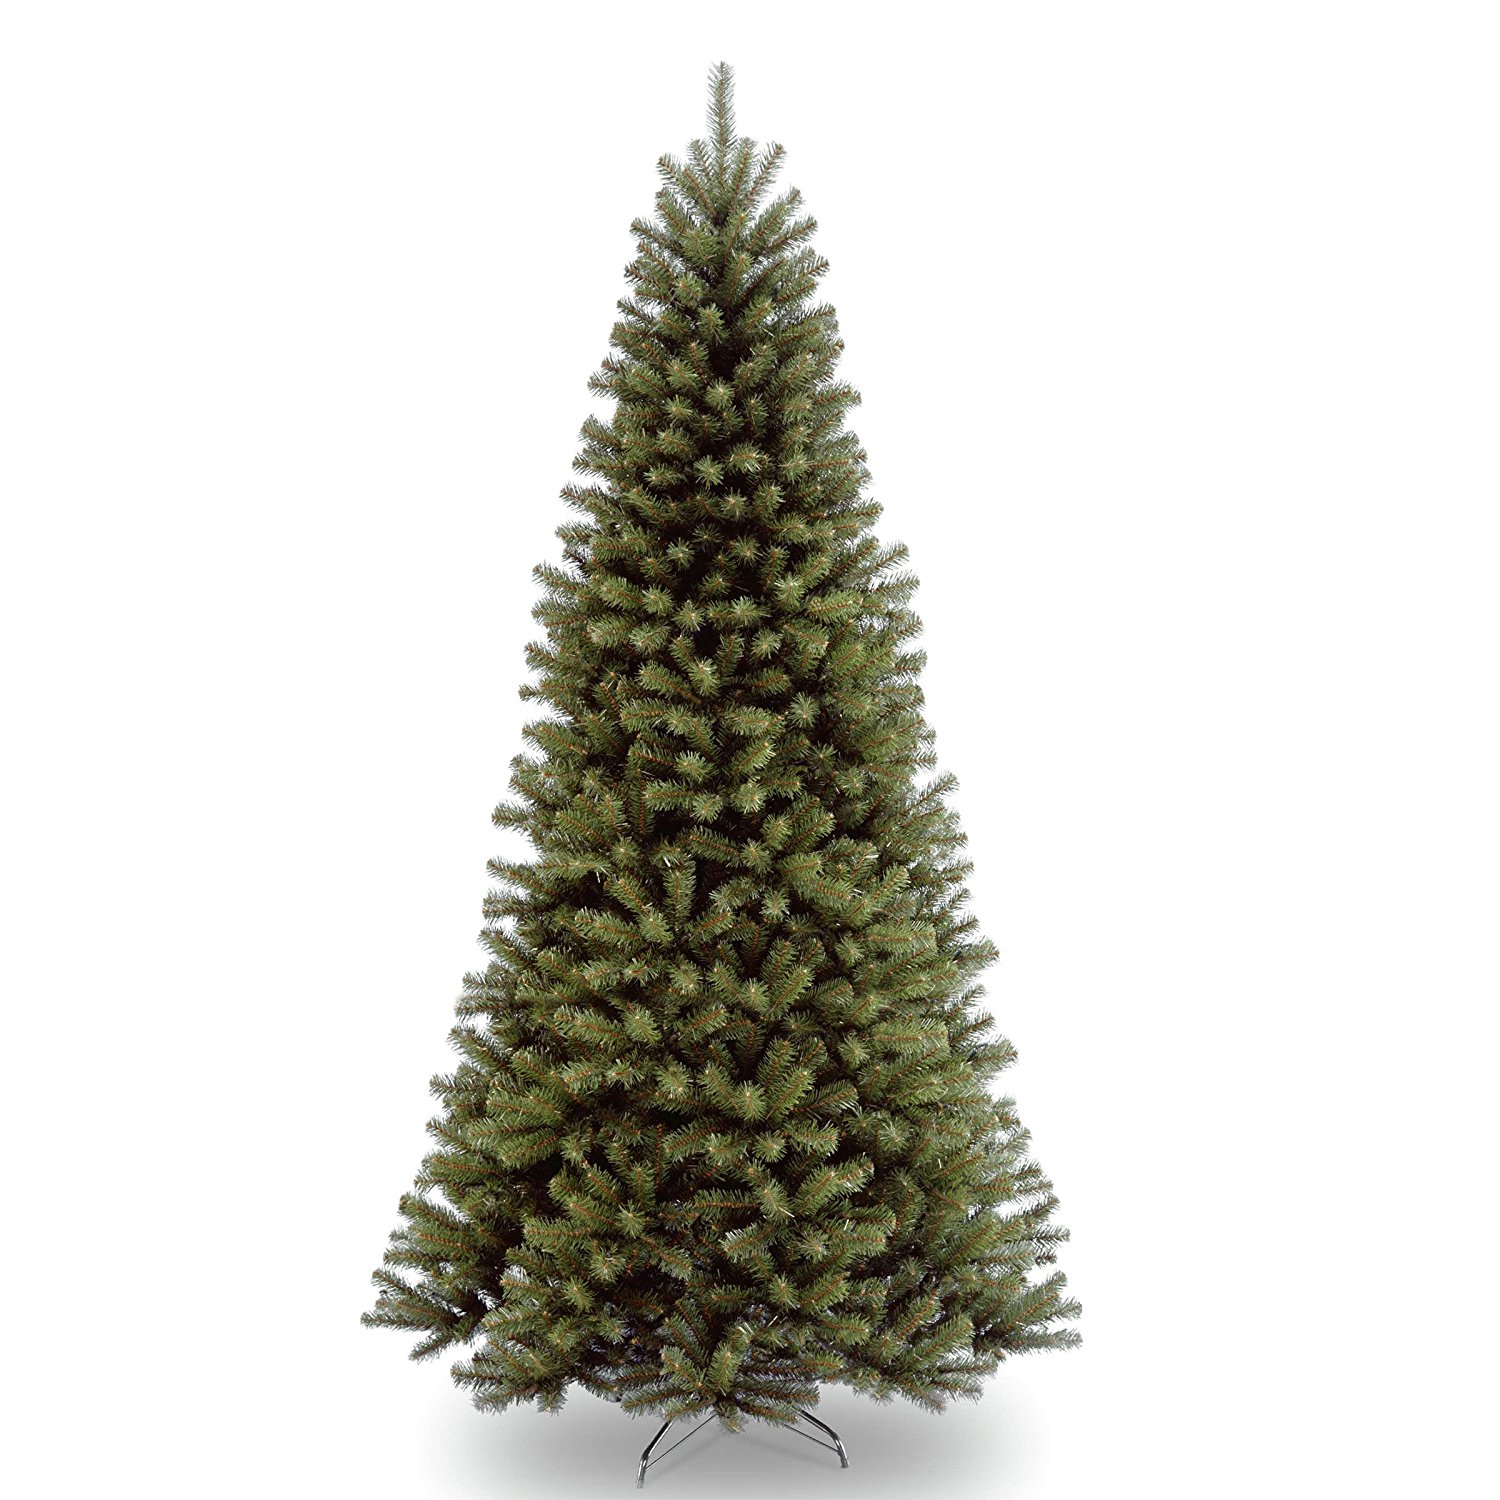 Amazon.com: National Tree 9 Foot North Valley Spruce Tree, Hinged ...